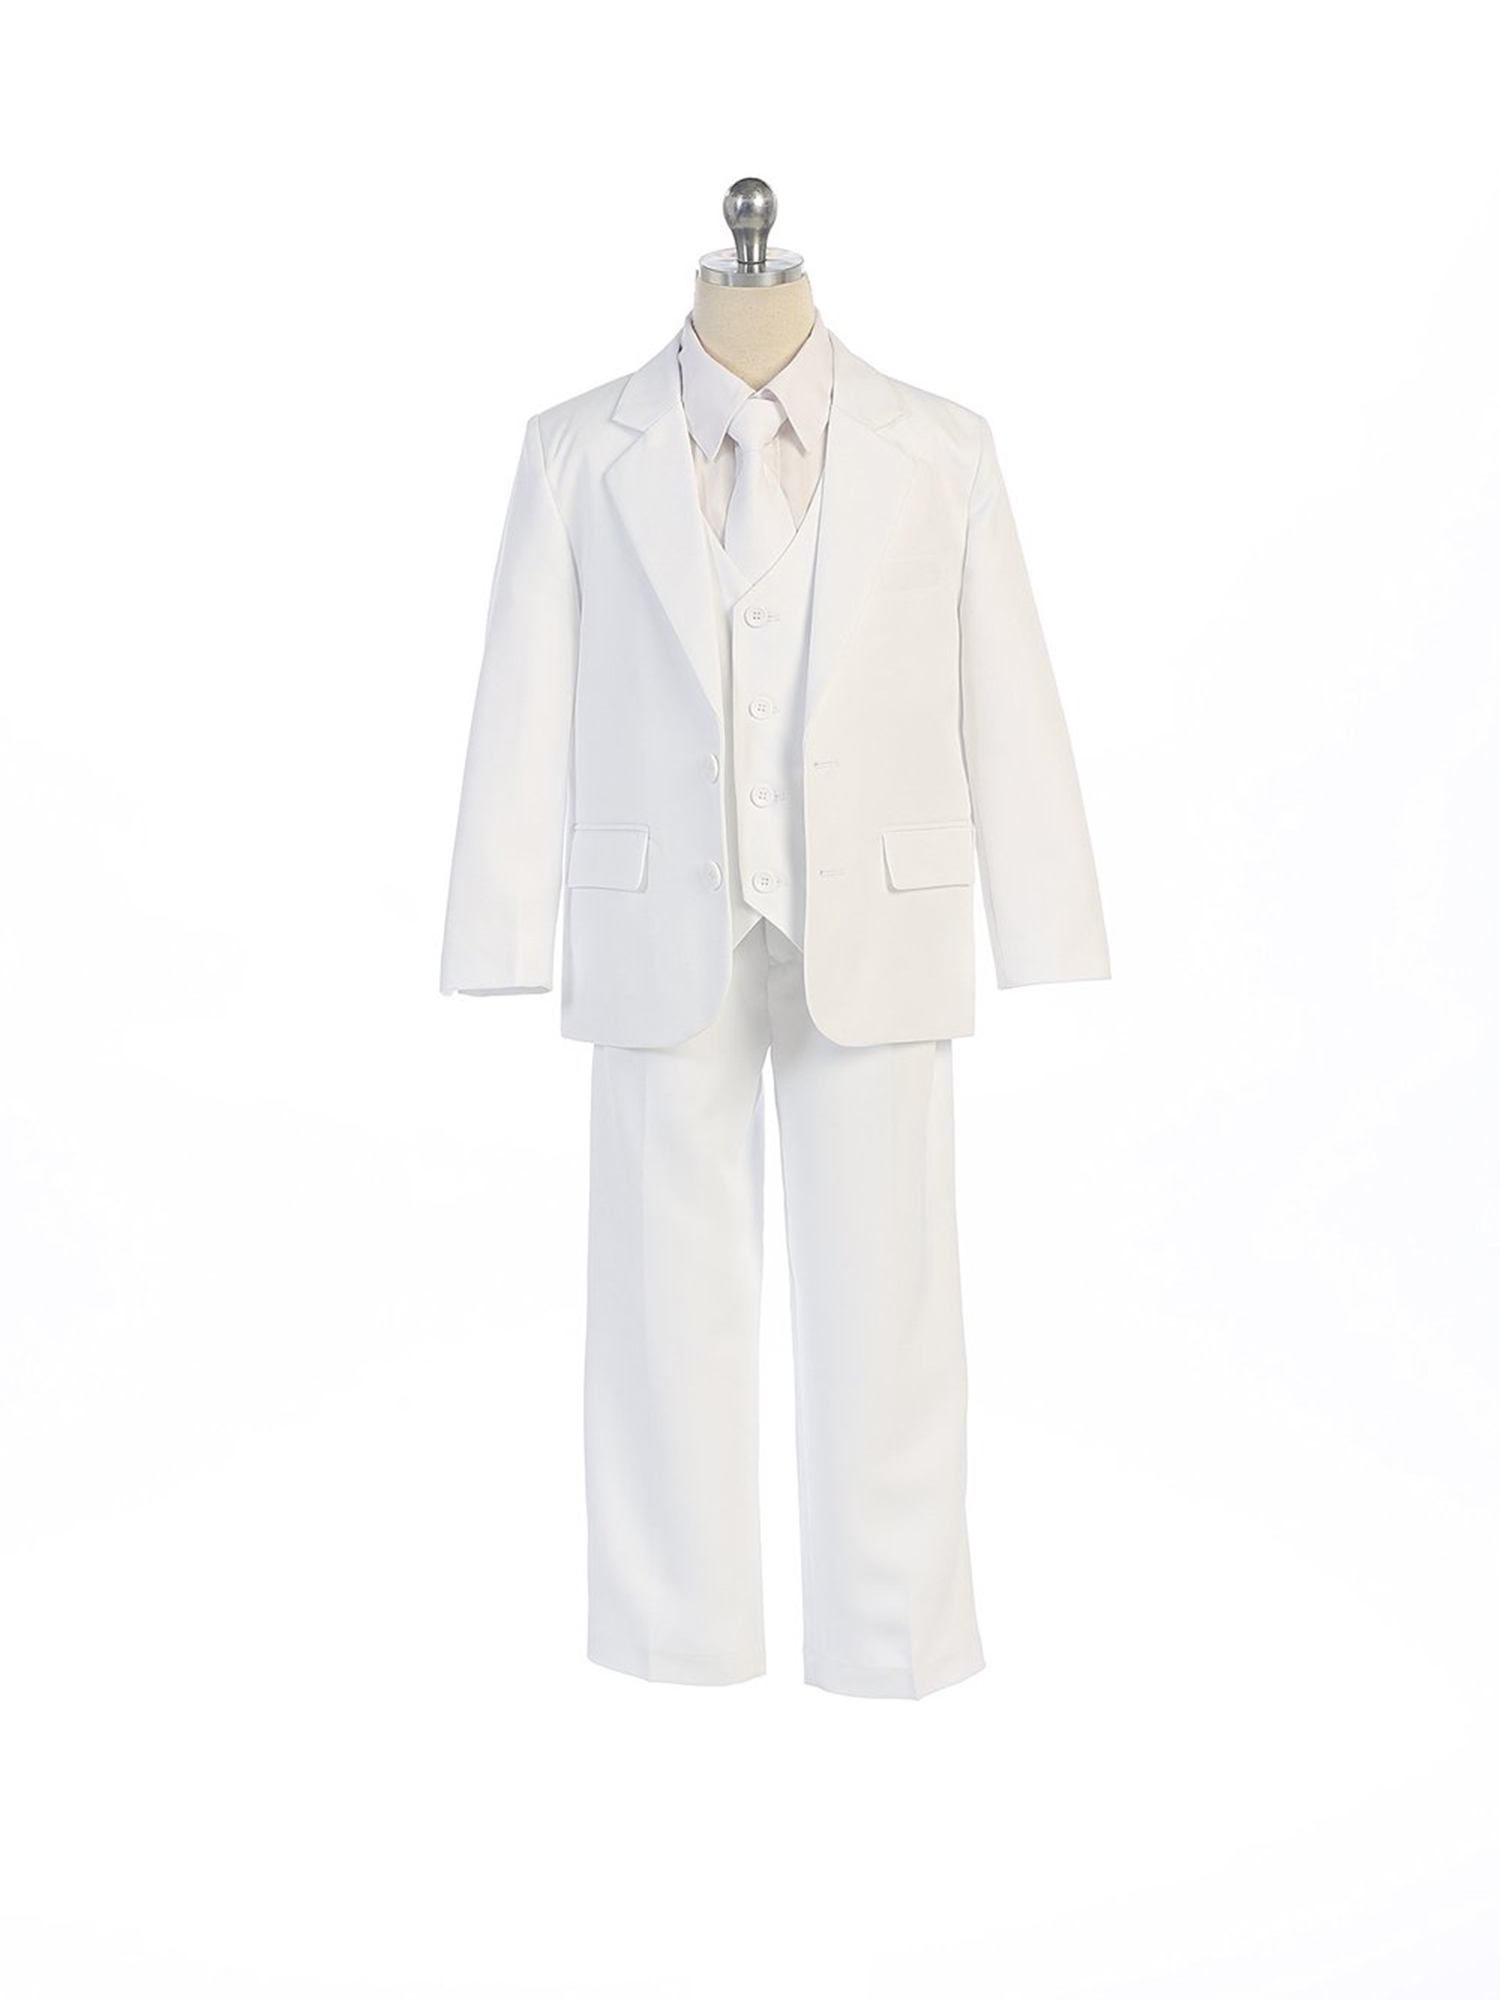 COLE Boys Suit with Shirt and Vest (5-Piece) - White - Size 2